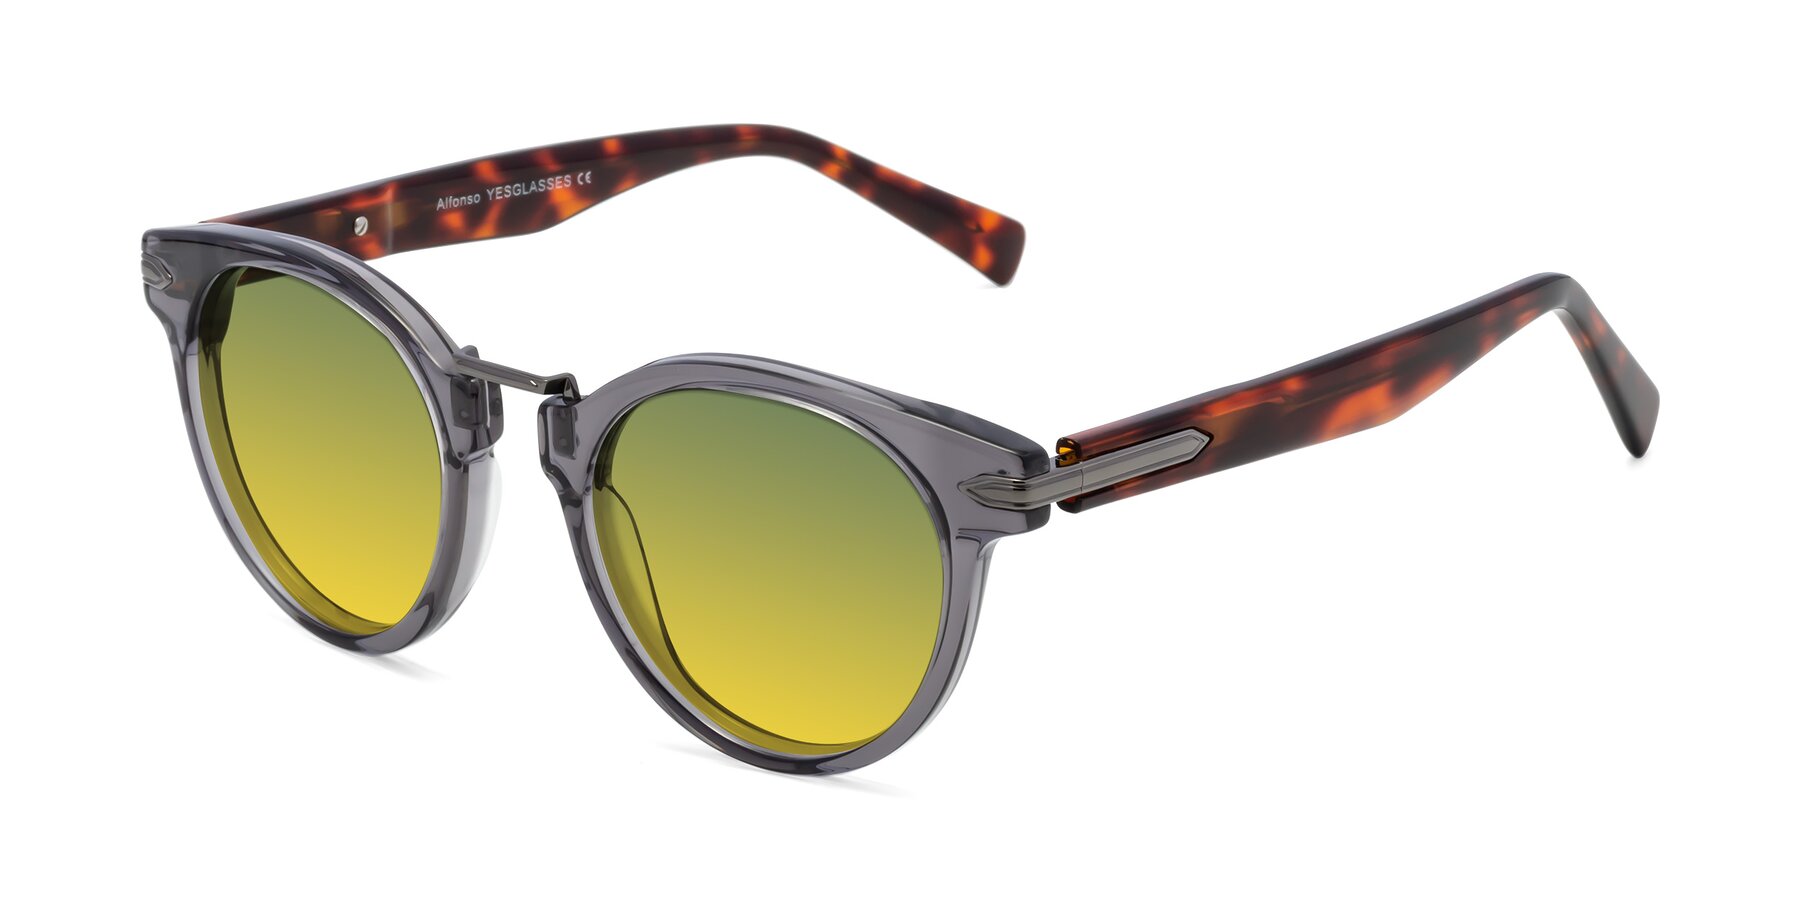 Angle of Alfonso in Gray /Tortoise with Green / Yellow Gradient Lenses